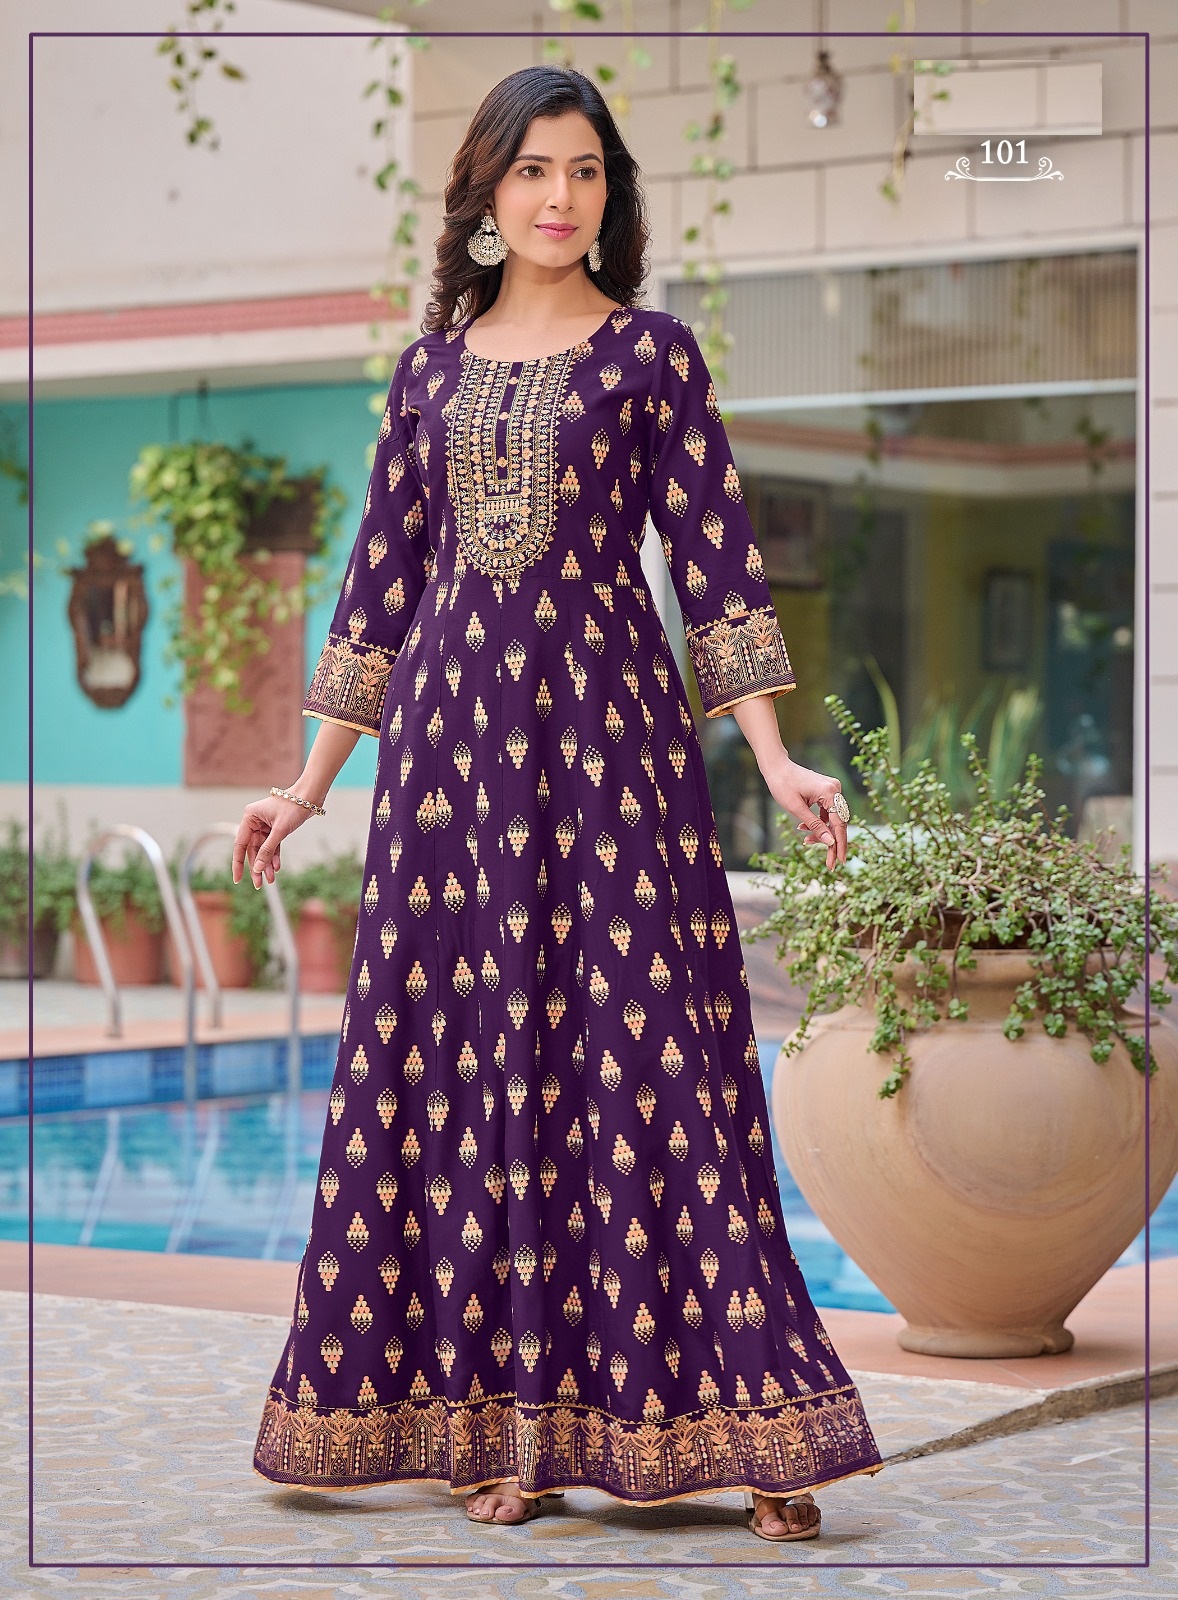 Newly Launched Heavy Rayon Salwar Kameez Suit for Women for Adults